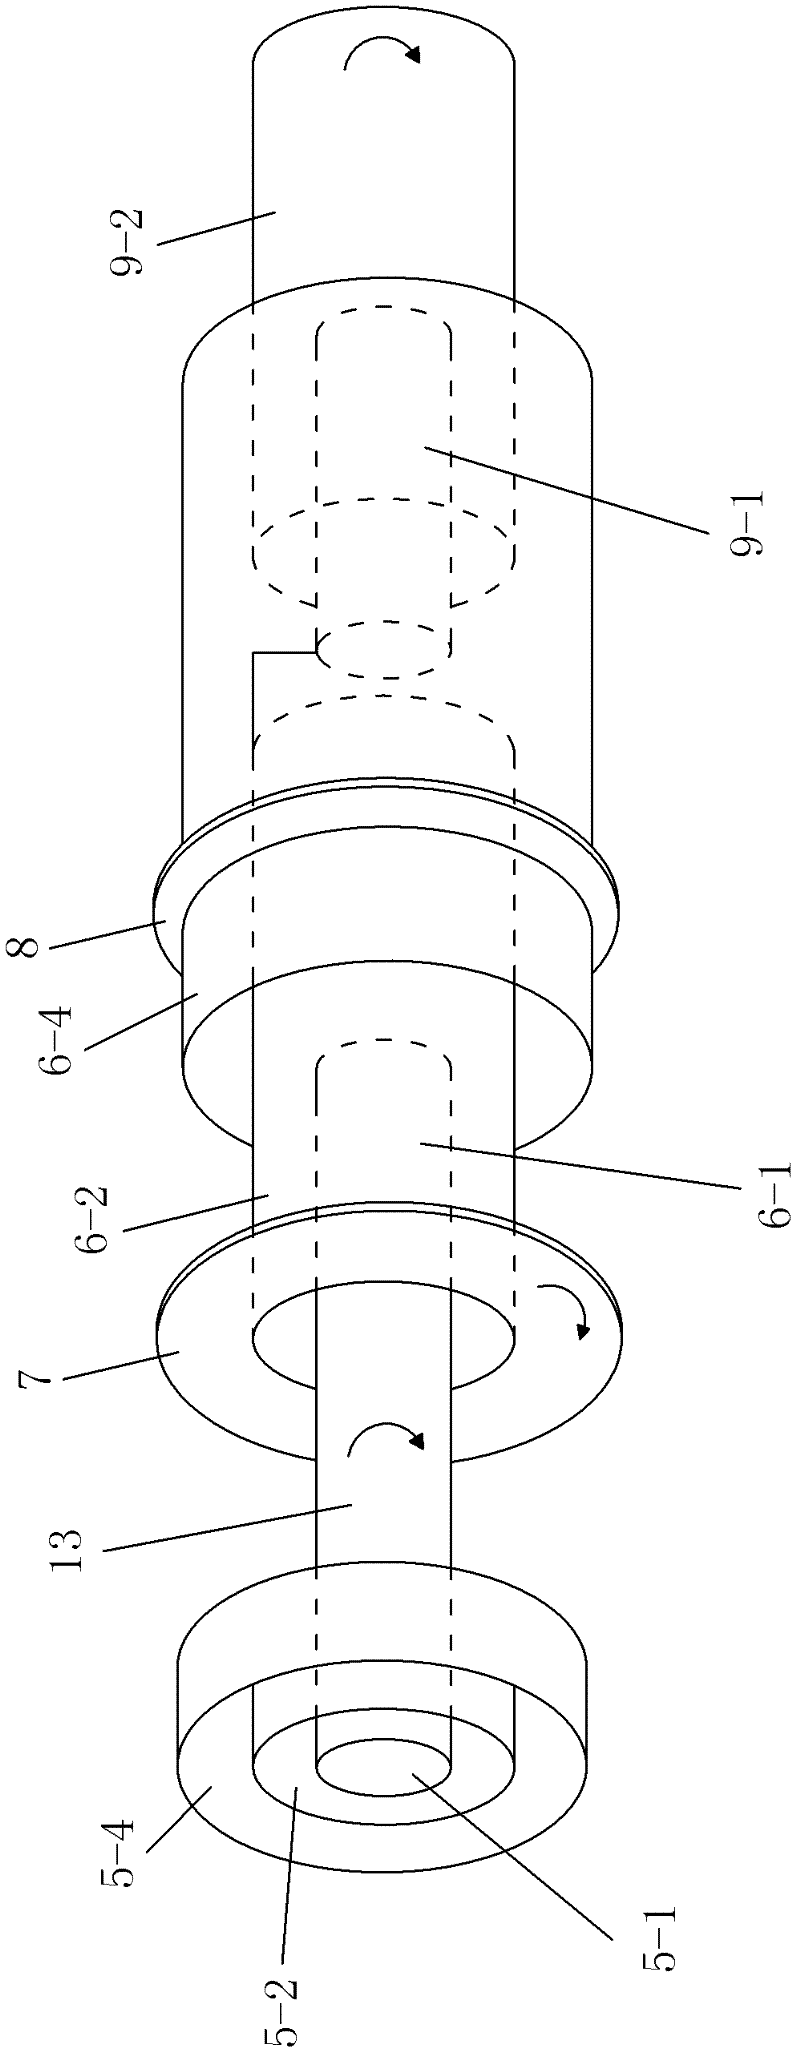 Automobile continuously variable transmission (CVT) system, and design and control methods thereof